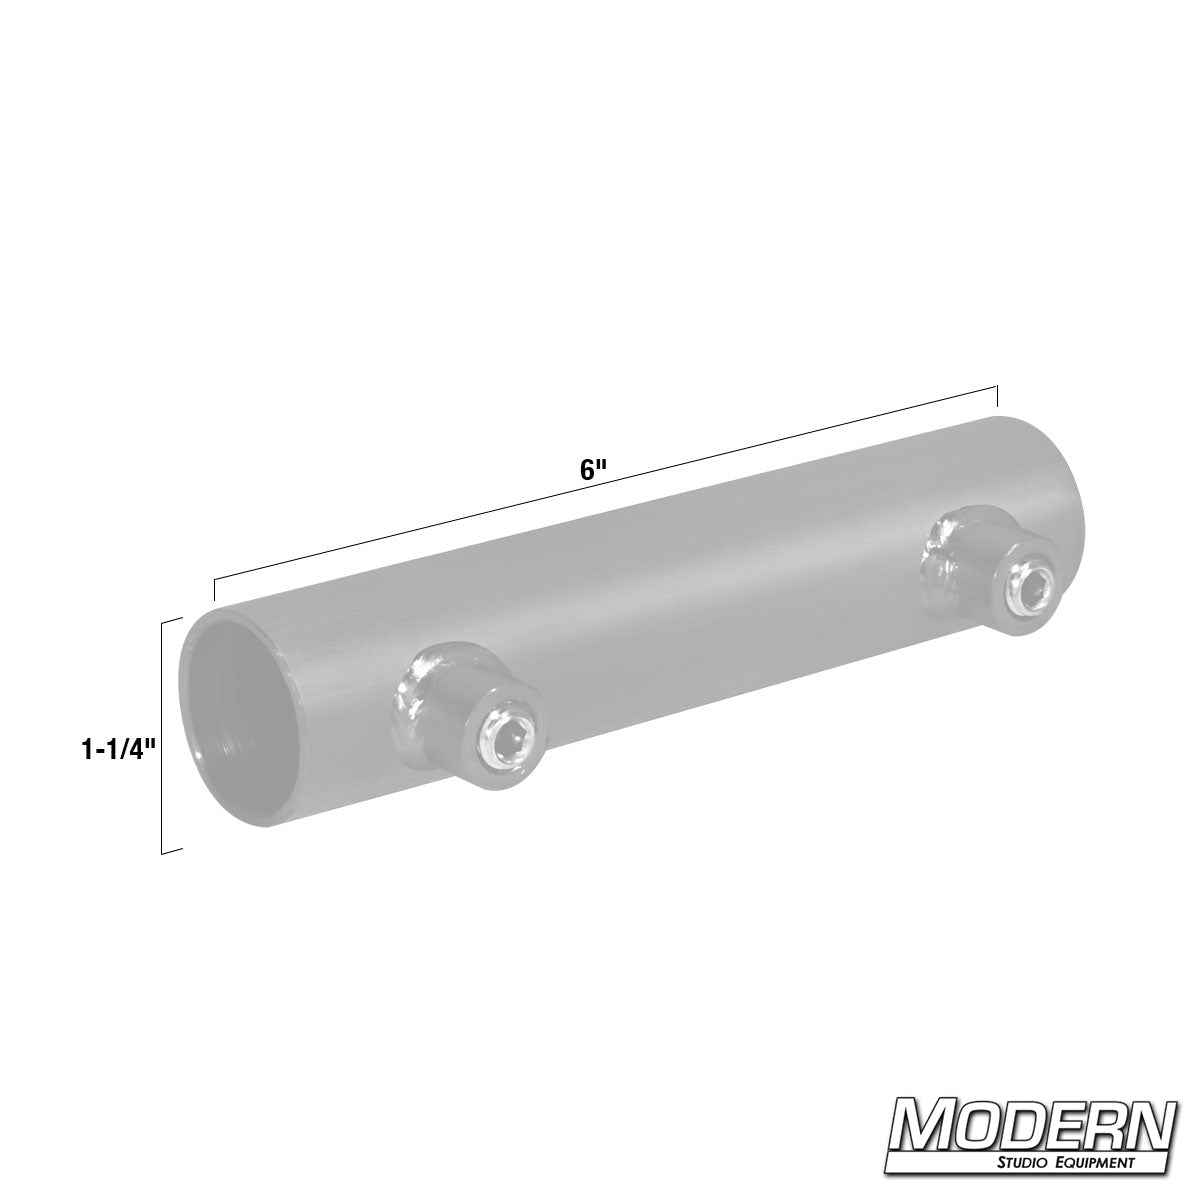 Pipe Frame Sleeve for 3/4" Speed-Rail®